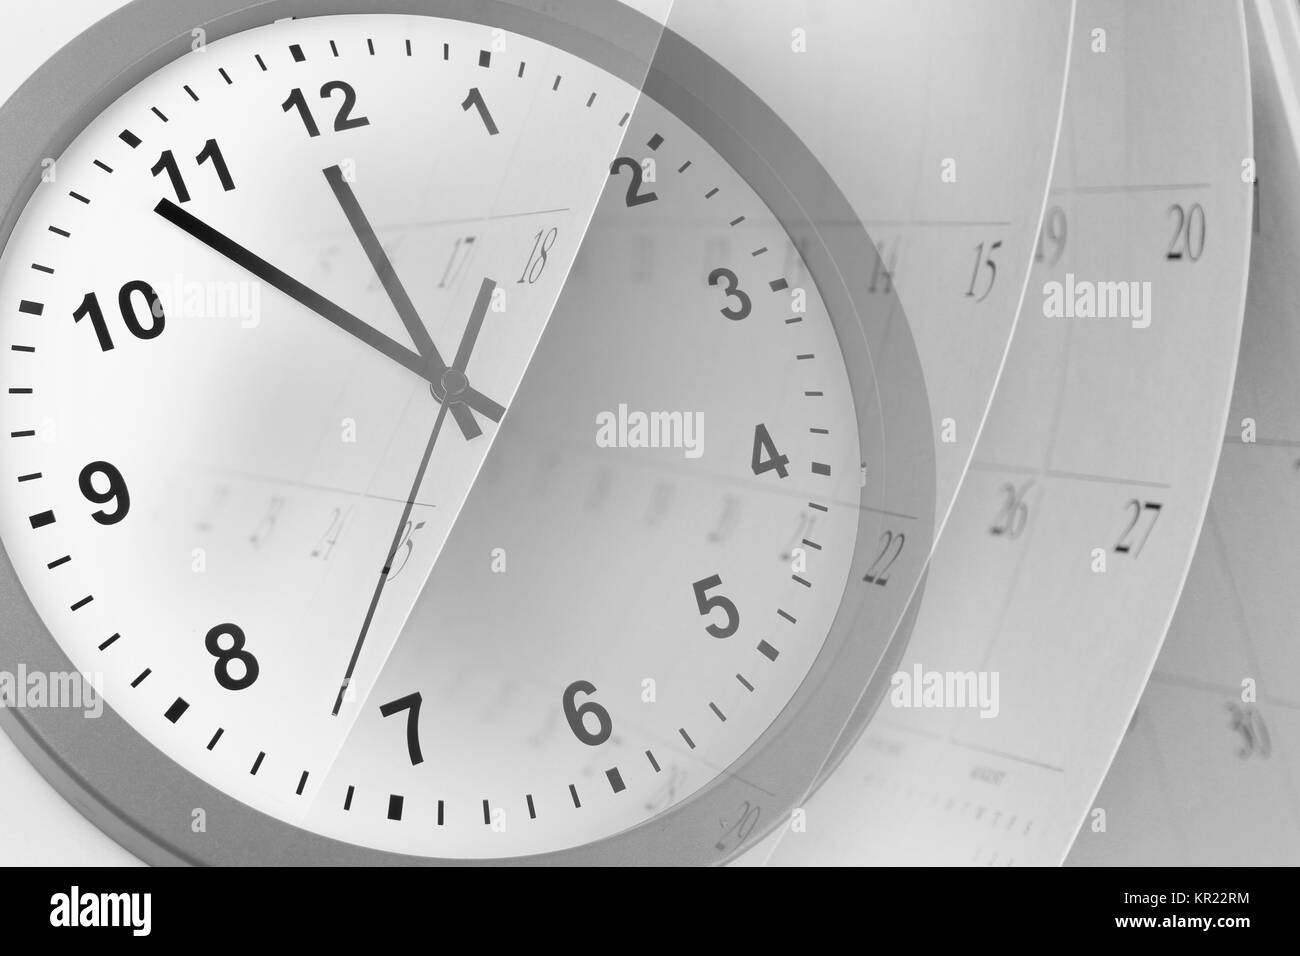 Clock face and calendar pages Stock Photo